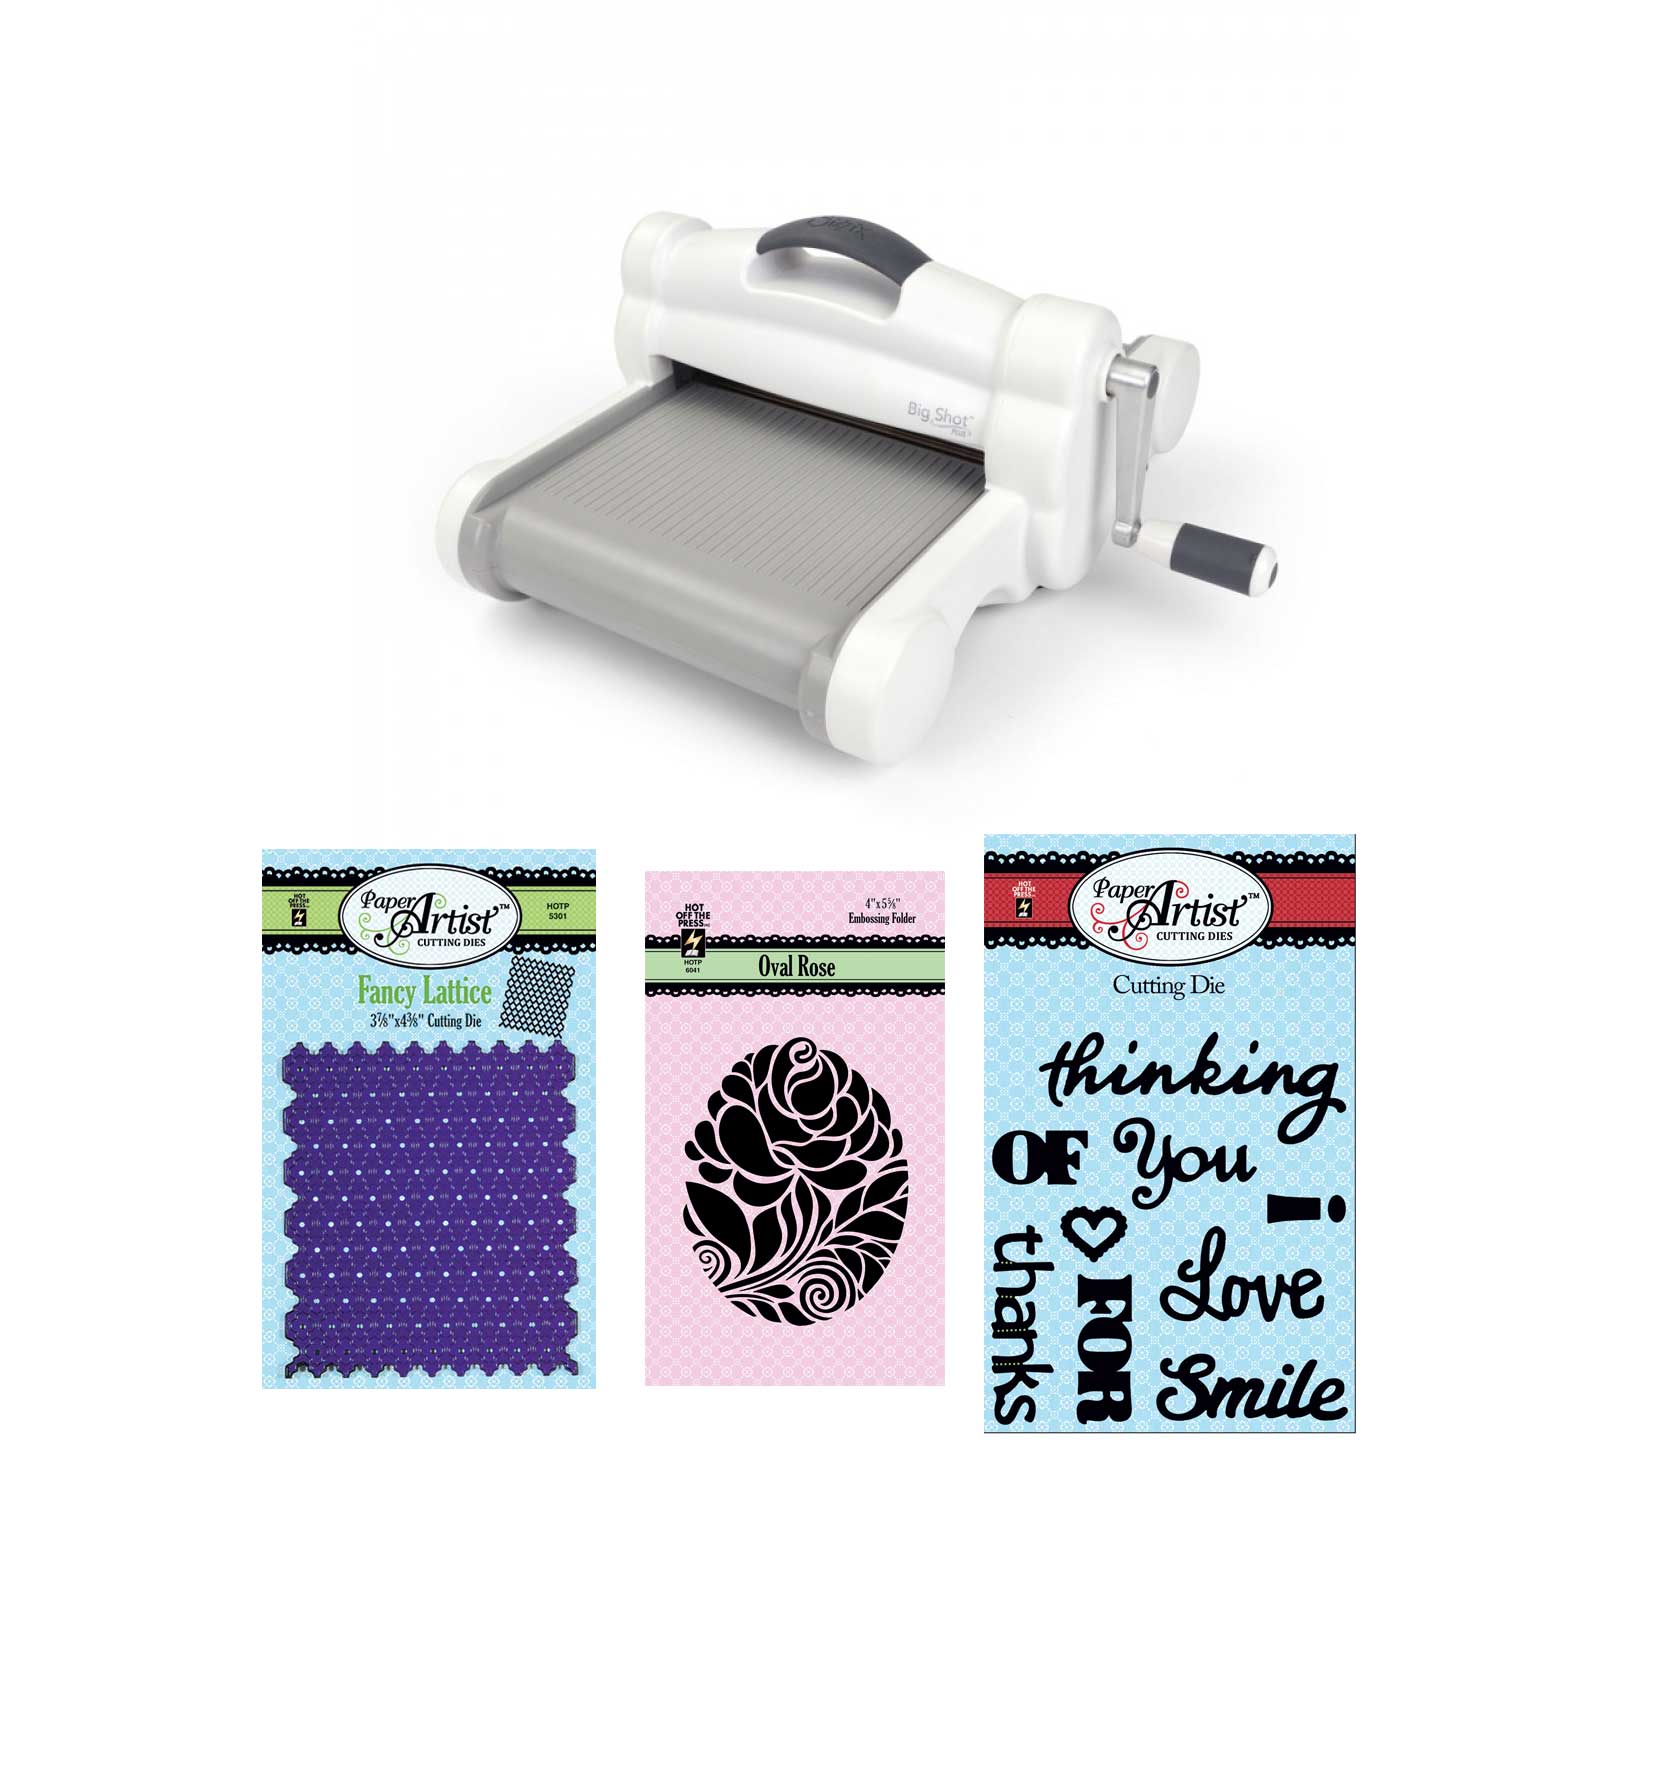 Everything To Know About The Sizzix Big Shot Switch! · Artsy